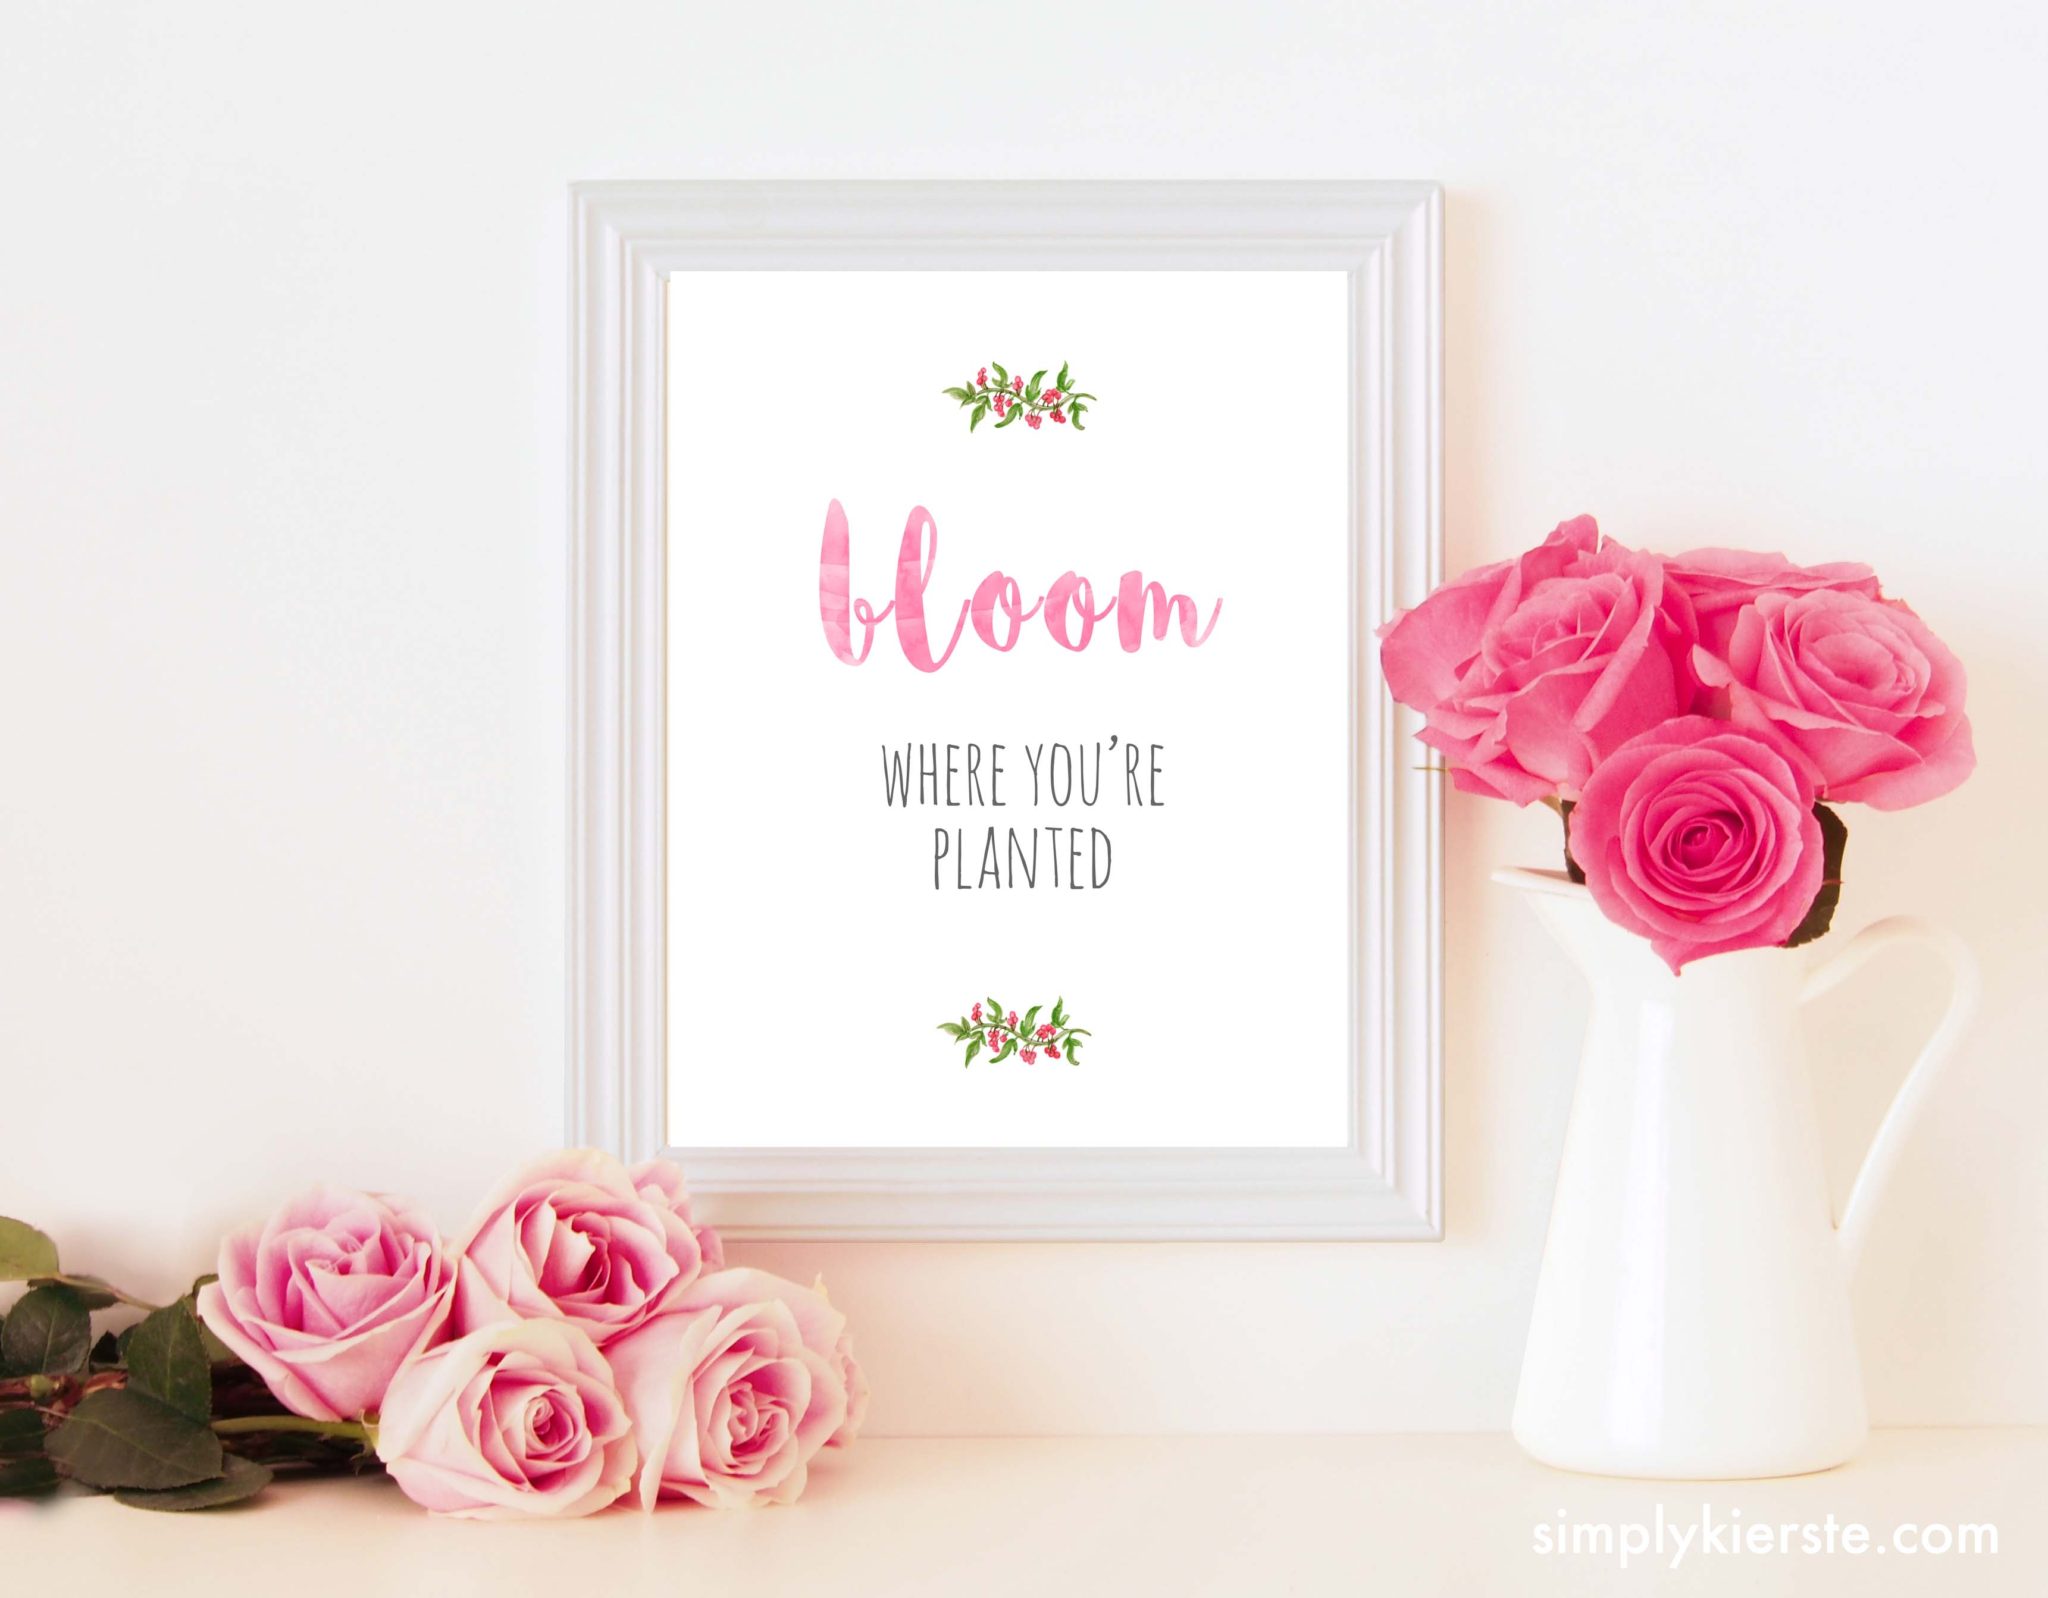 Bloom Where You're Planted Prints For Your Home | Simply Kierste